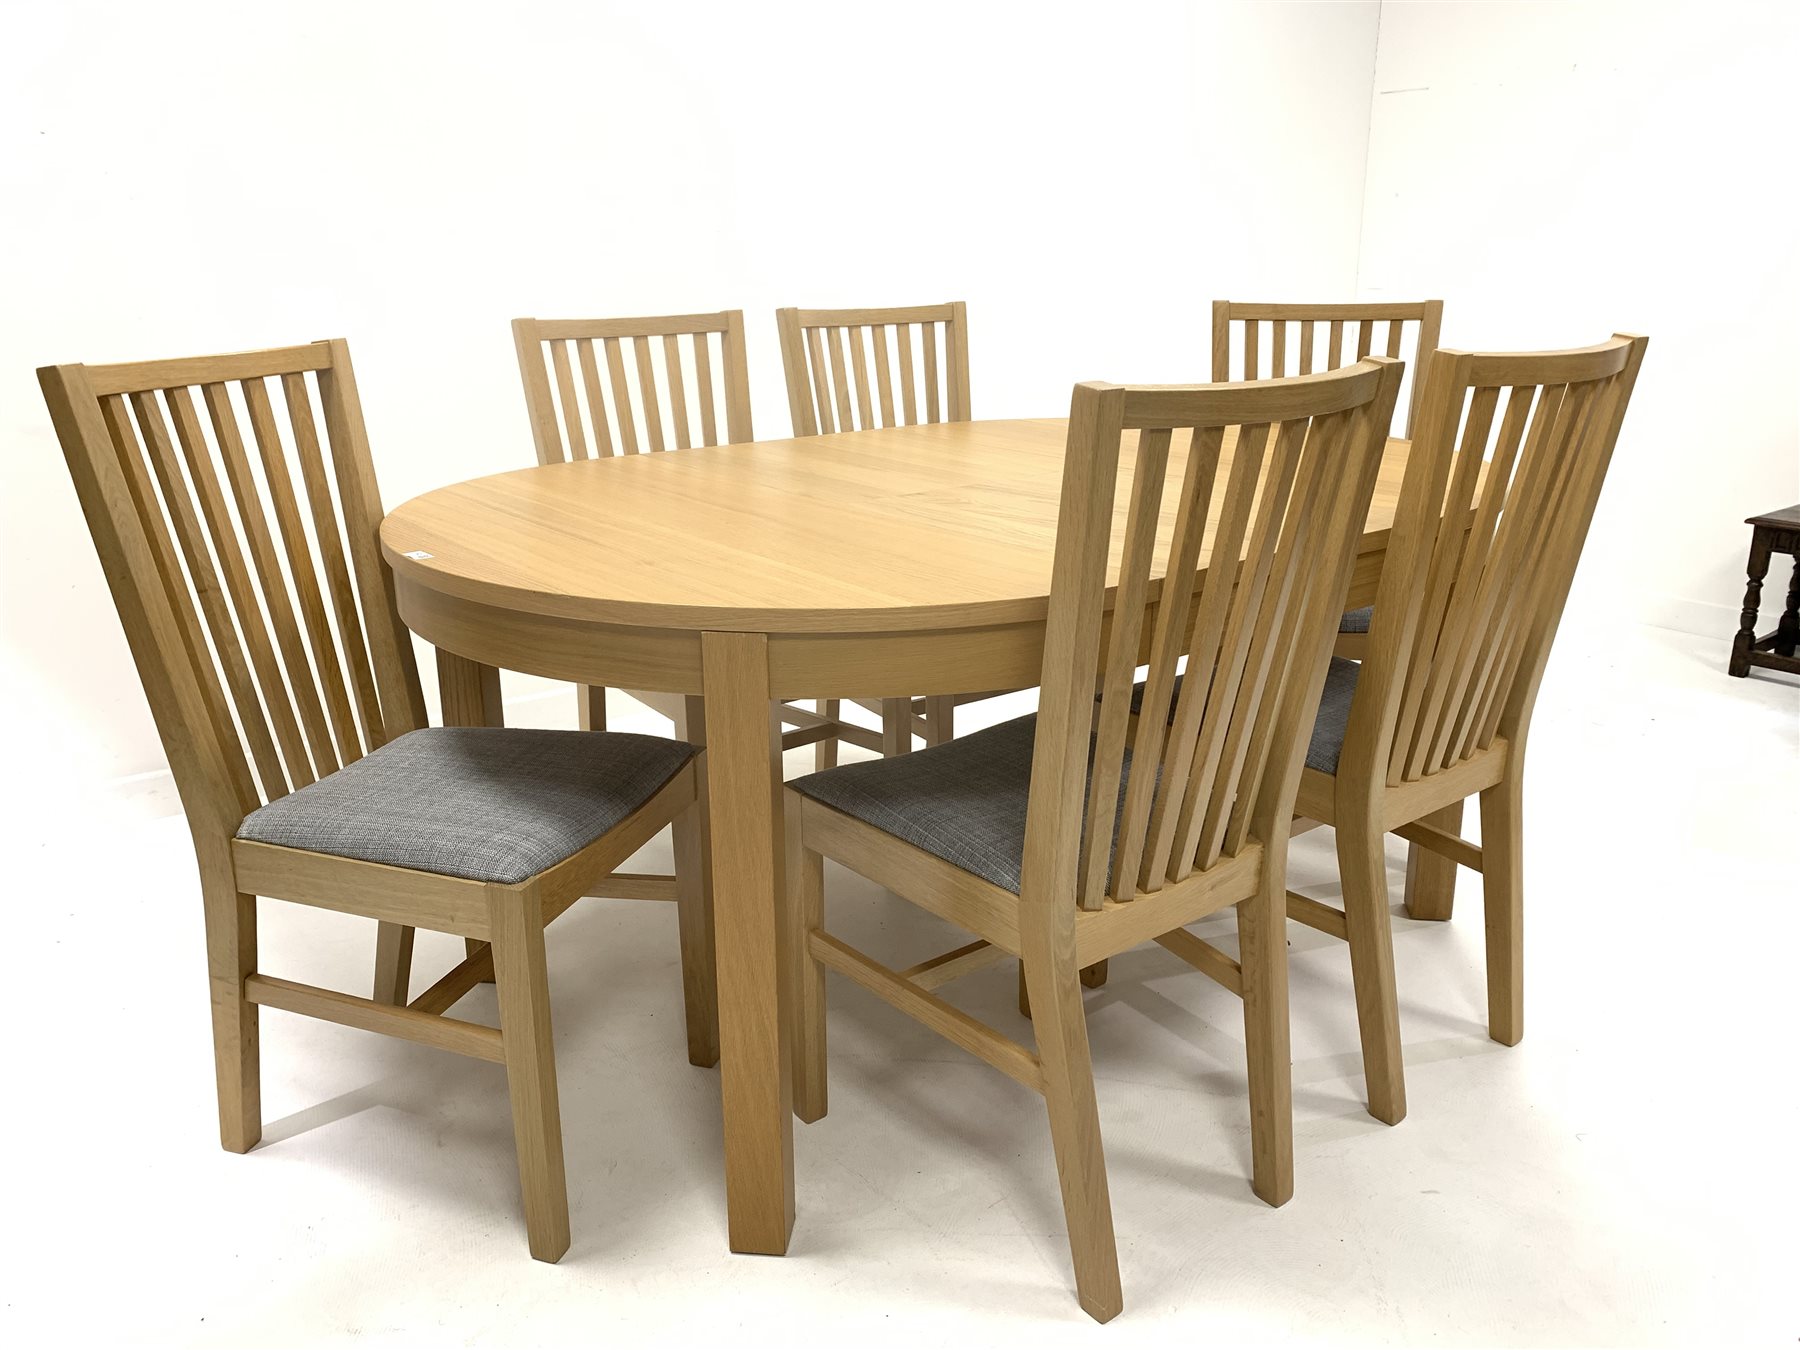 Ikea - Light oak oval extending dining table, with one fold away